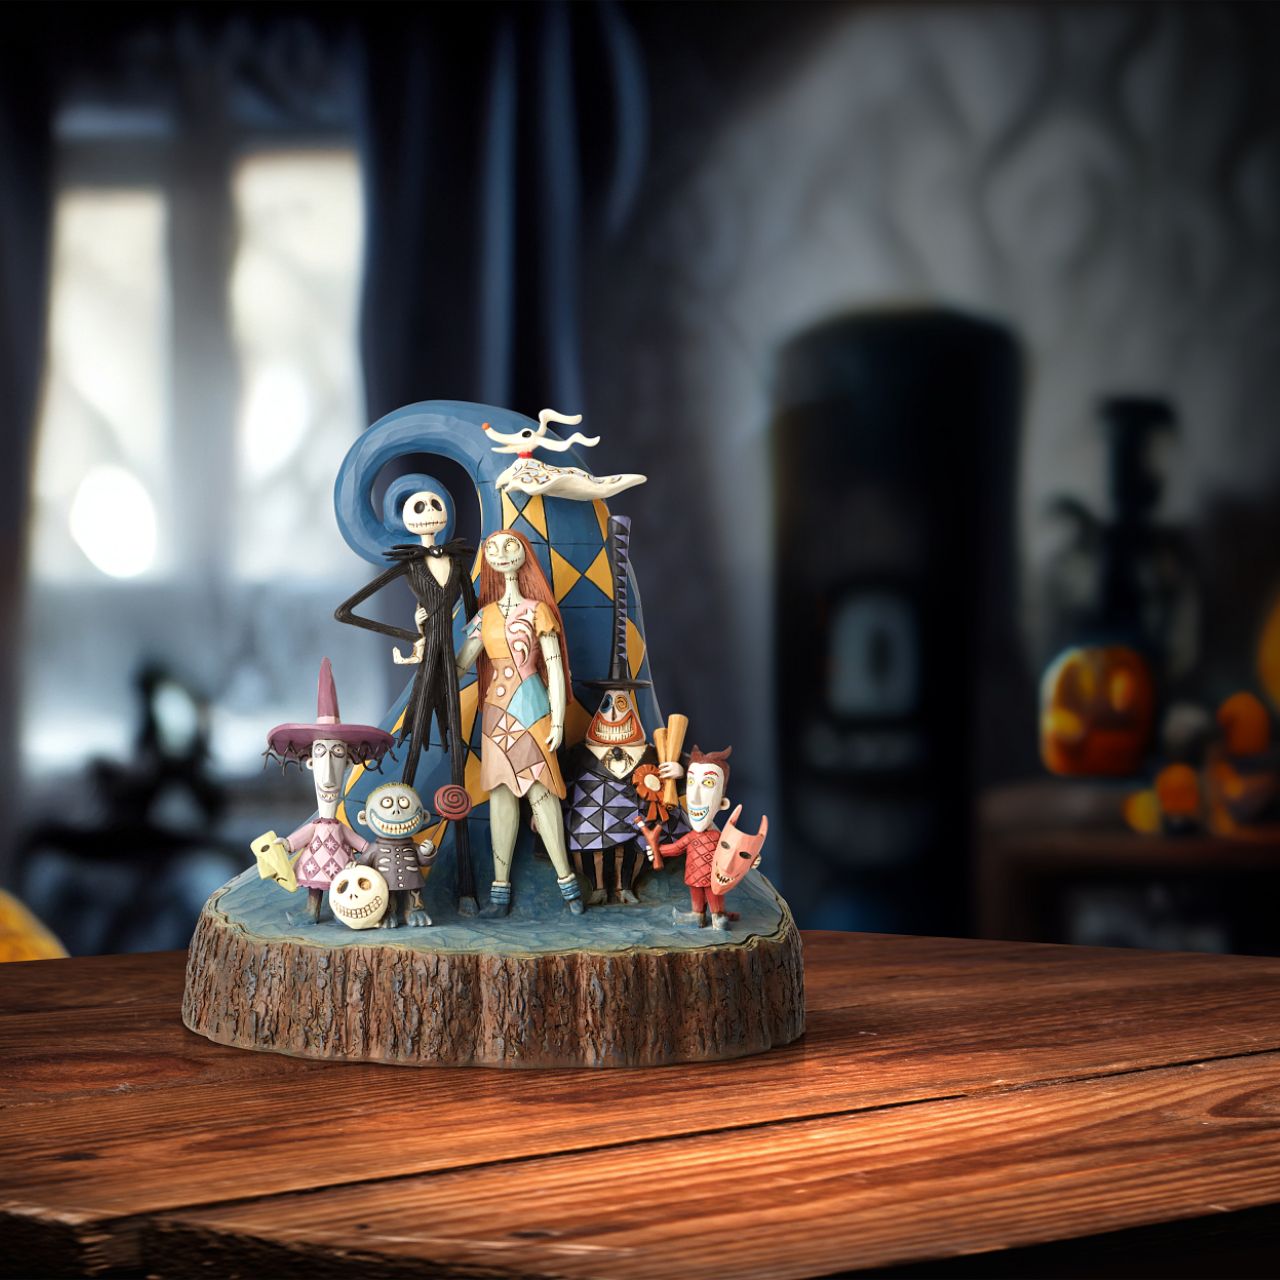 What a Wonderful Nightmare Nightmare Before Christmas  Jack, Sally and the ghoulish residents of Halloween Town gather by Spiral Hill to greet you into their eerie world. Jim Shore's Carved by Heart design is a Nightmare Before Christmas fan's dream come true and is the perfect, spooky addition to your collection.